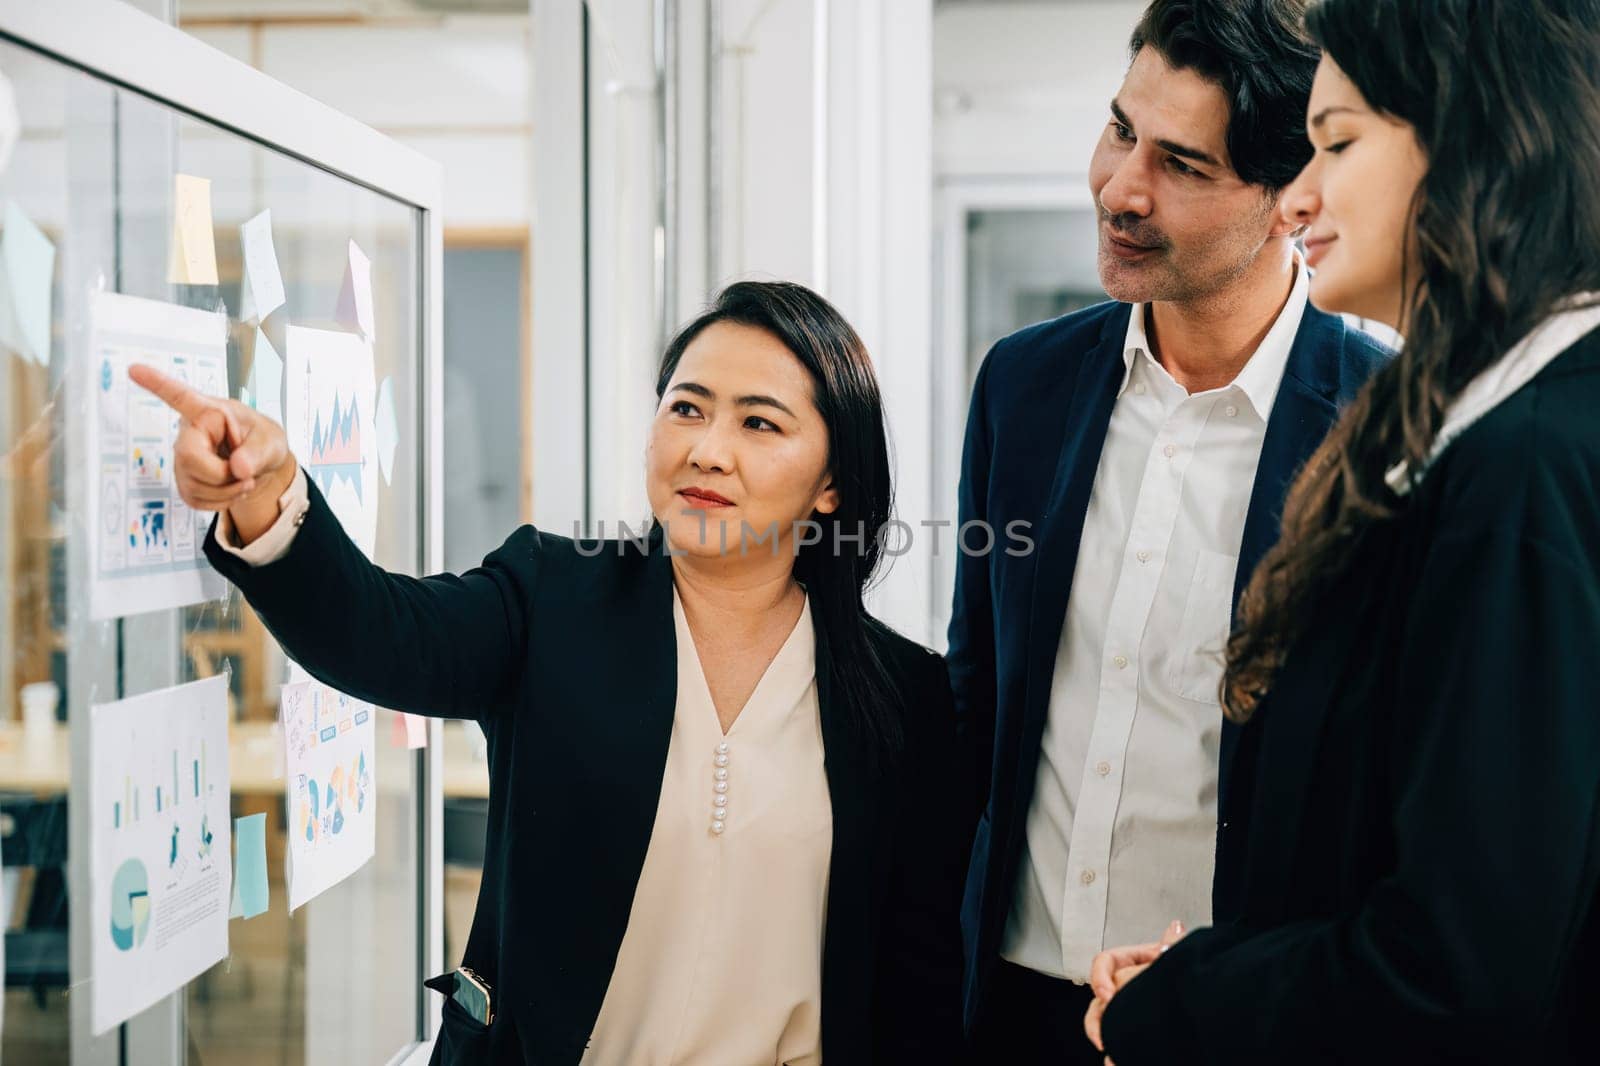 Engaging in teamwork-focused meeting, colleagues actively participate in brainstorming sessions and discussions around whiteboard. Emphasizing effective collaboration conversations, and feedback. by Sorapop